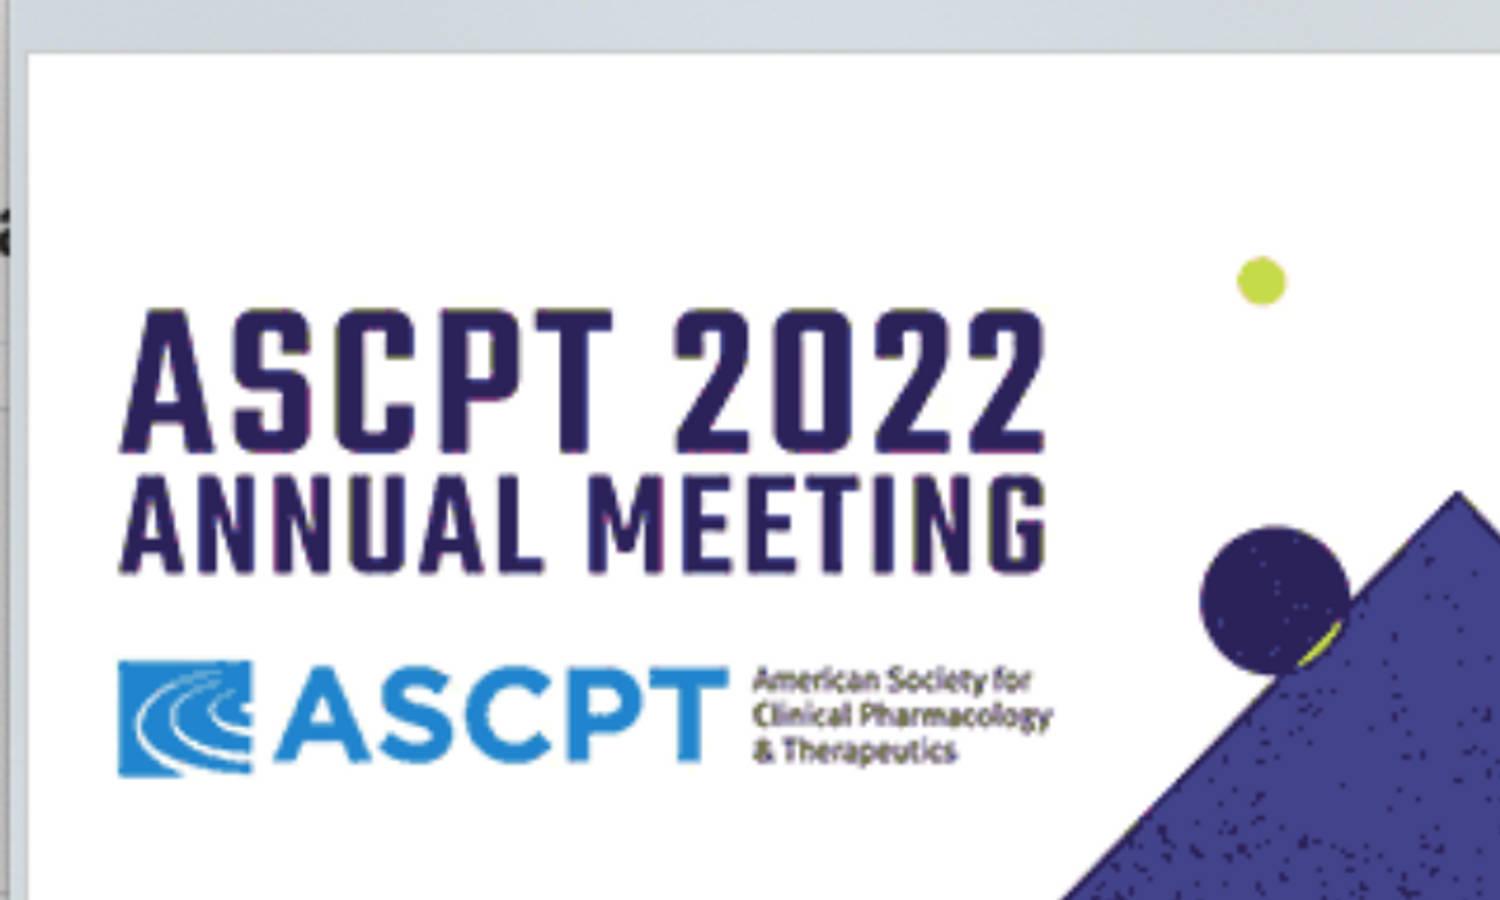 American Society for Clinical Pharmacology and Therapeutics (ASCPT) 123rd Annual Meeting